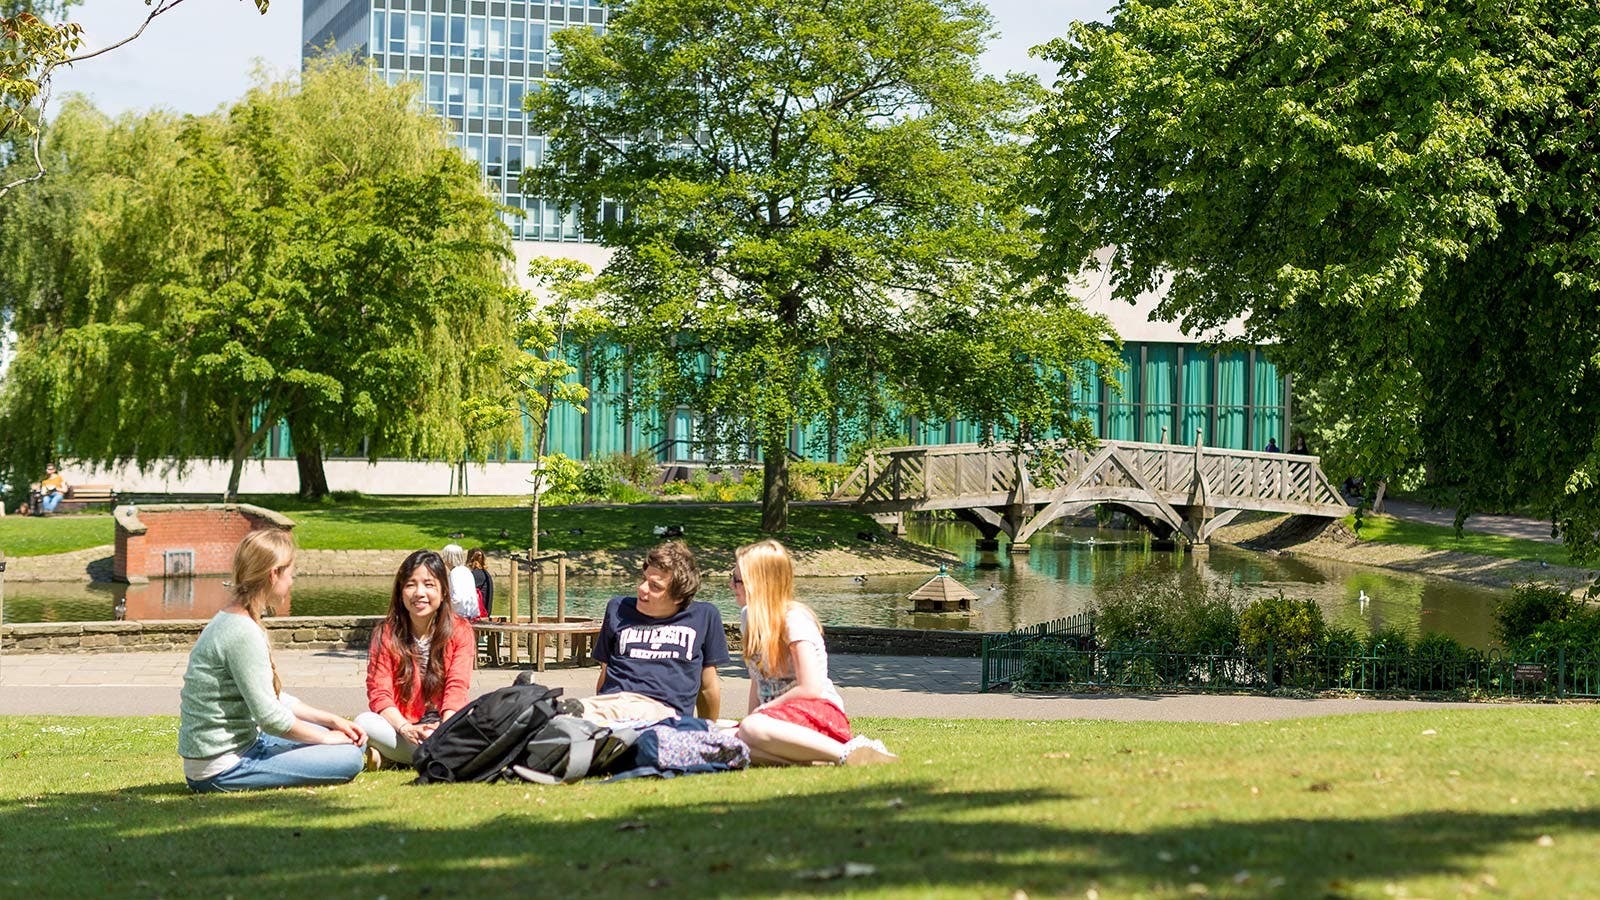 Students spending time in the gardens